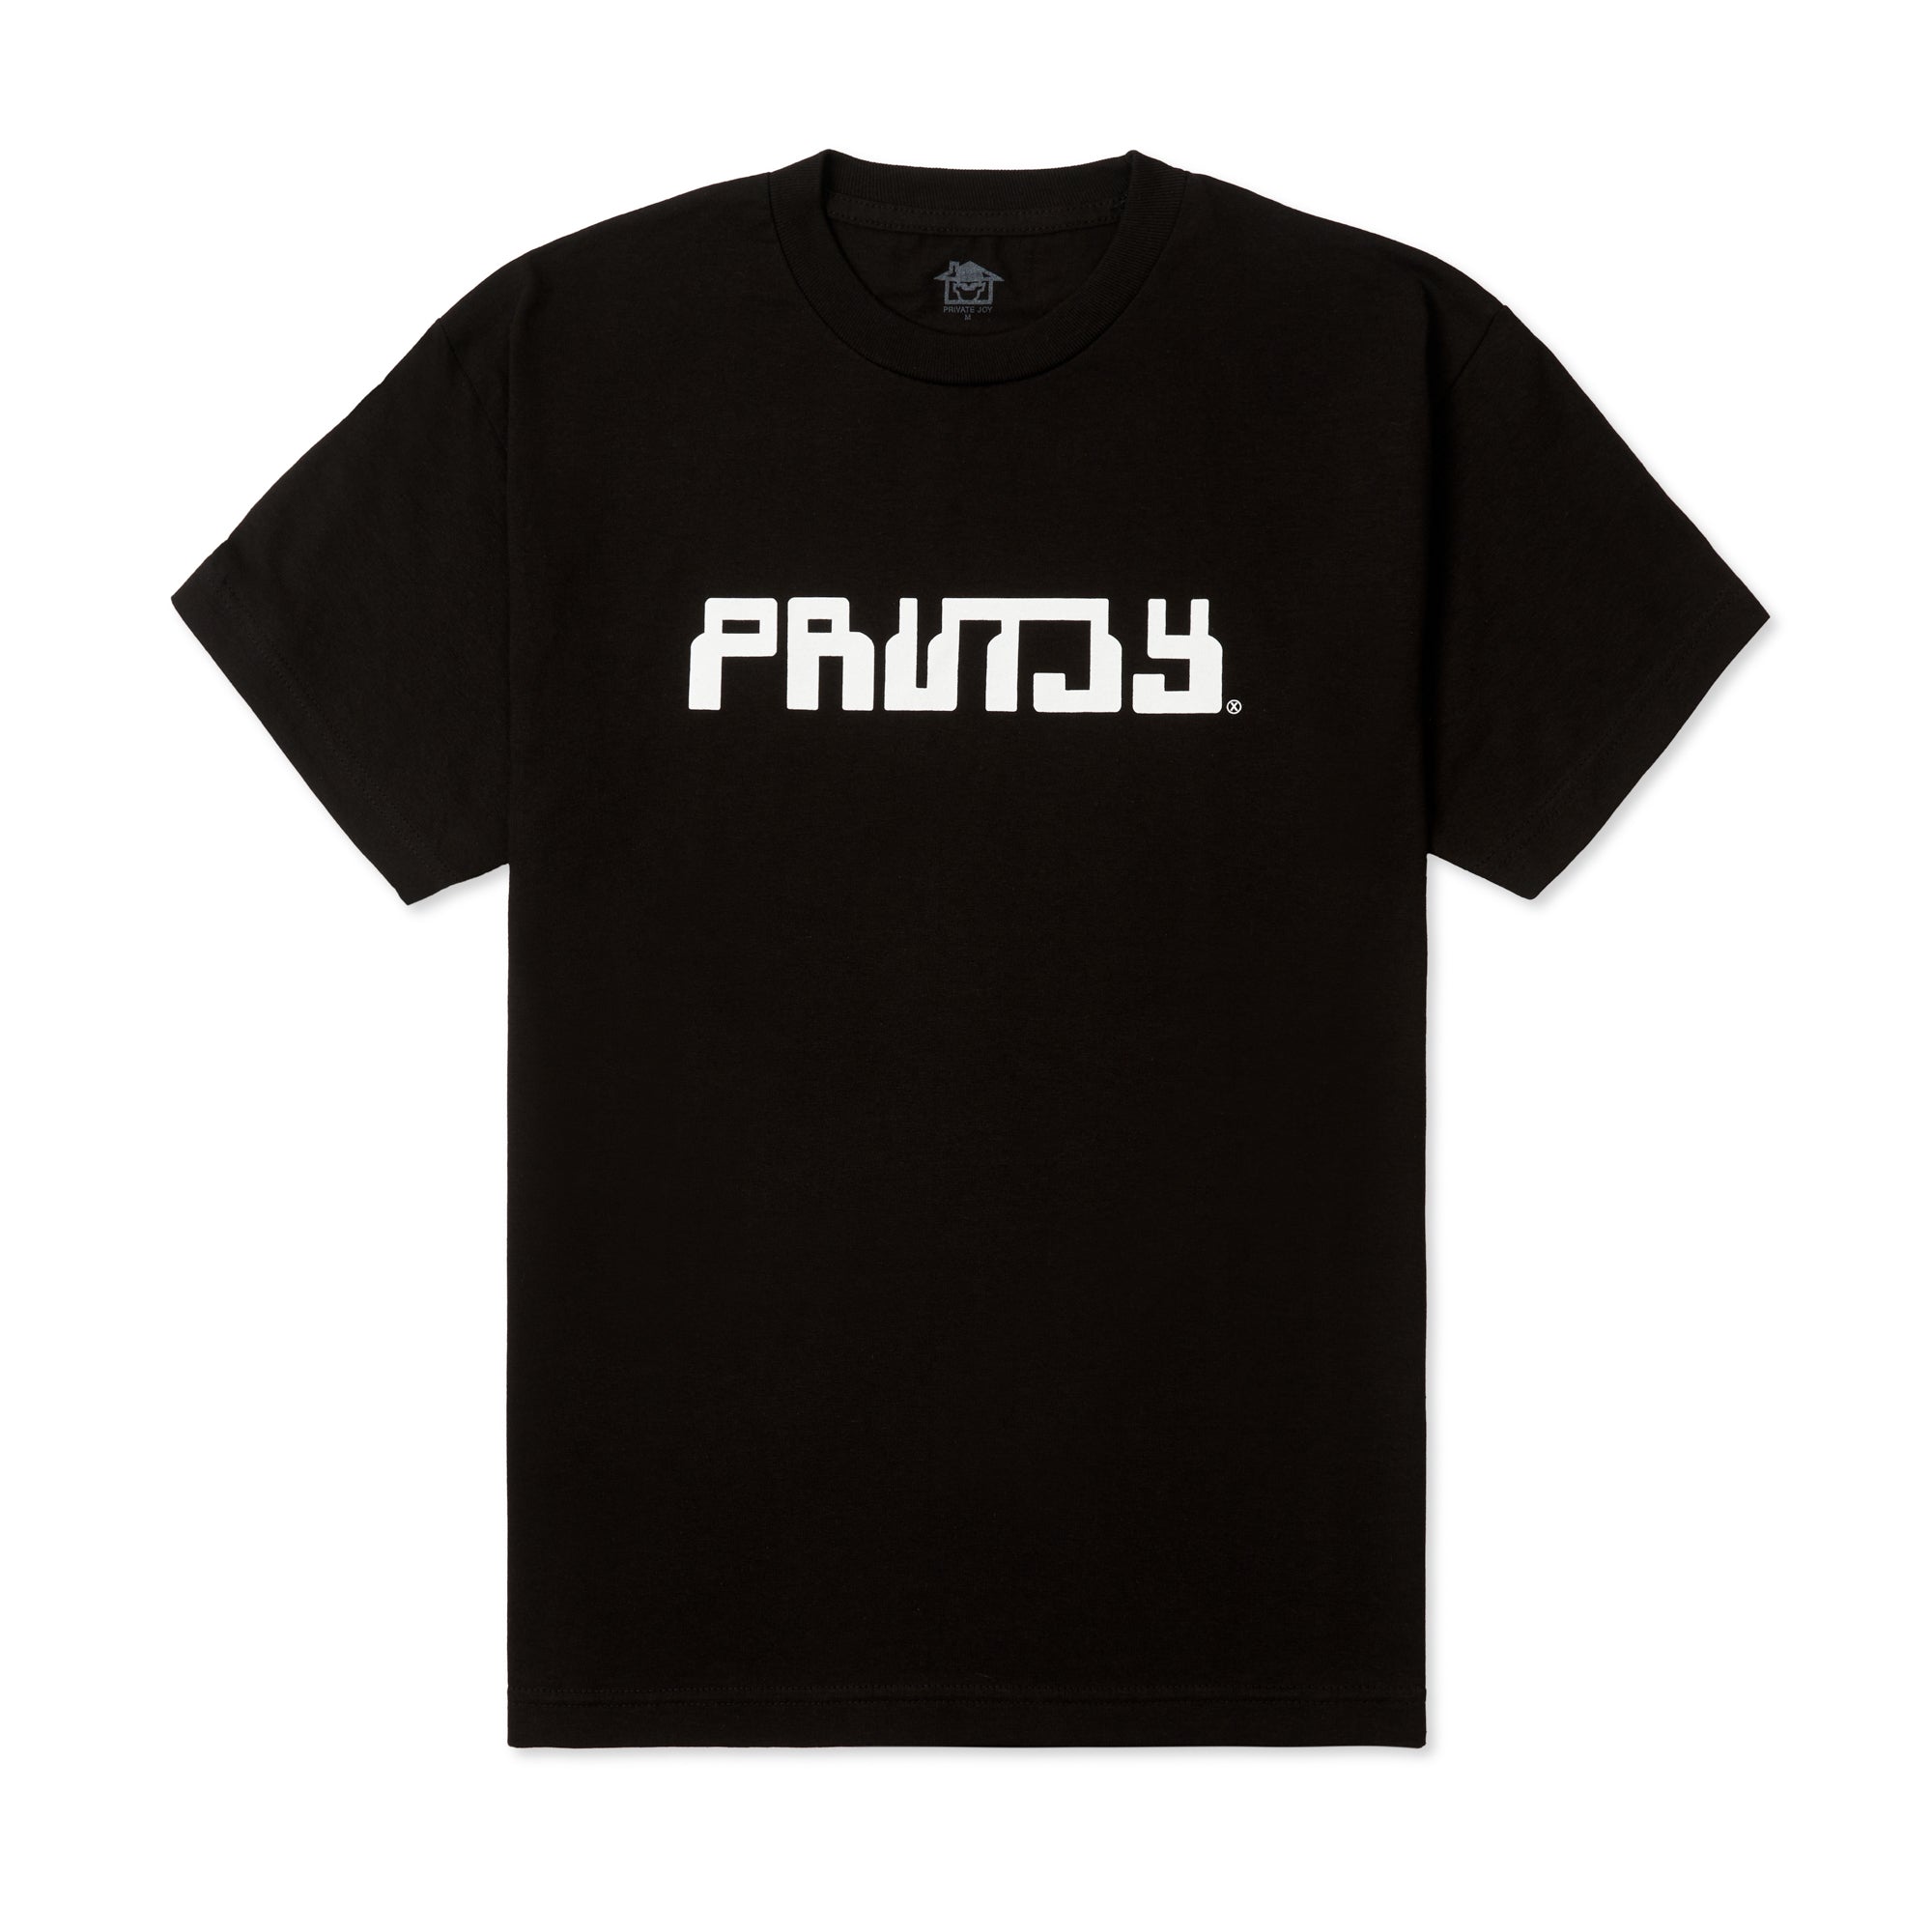 Cable Tee, Black